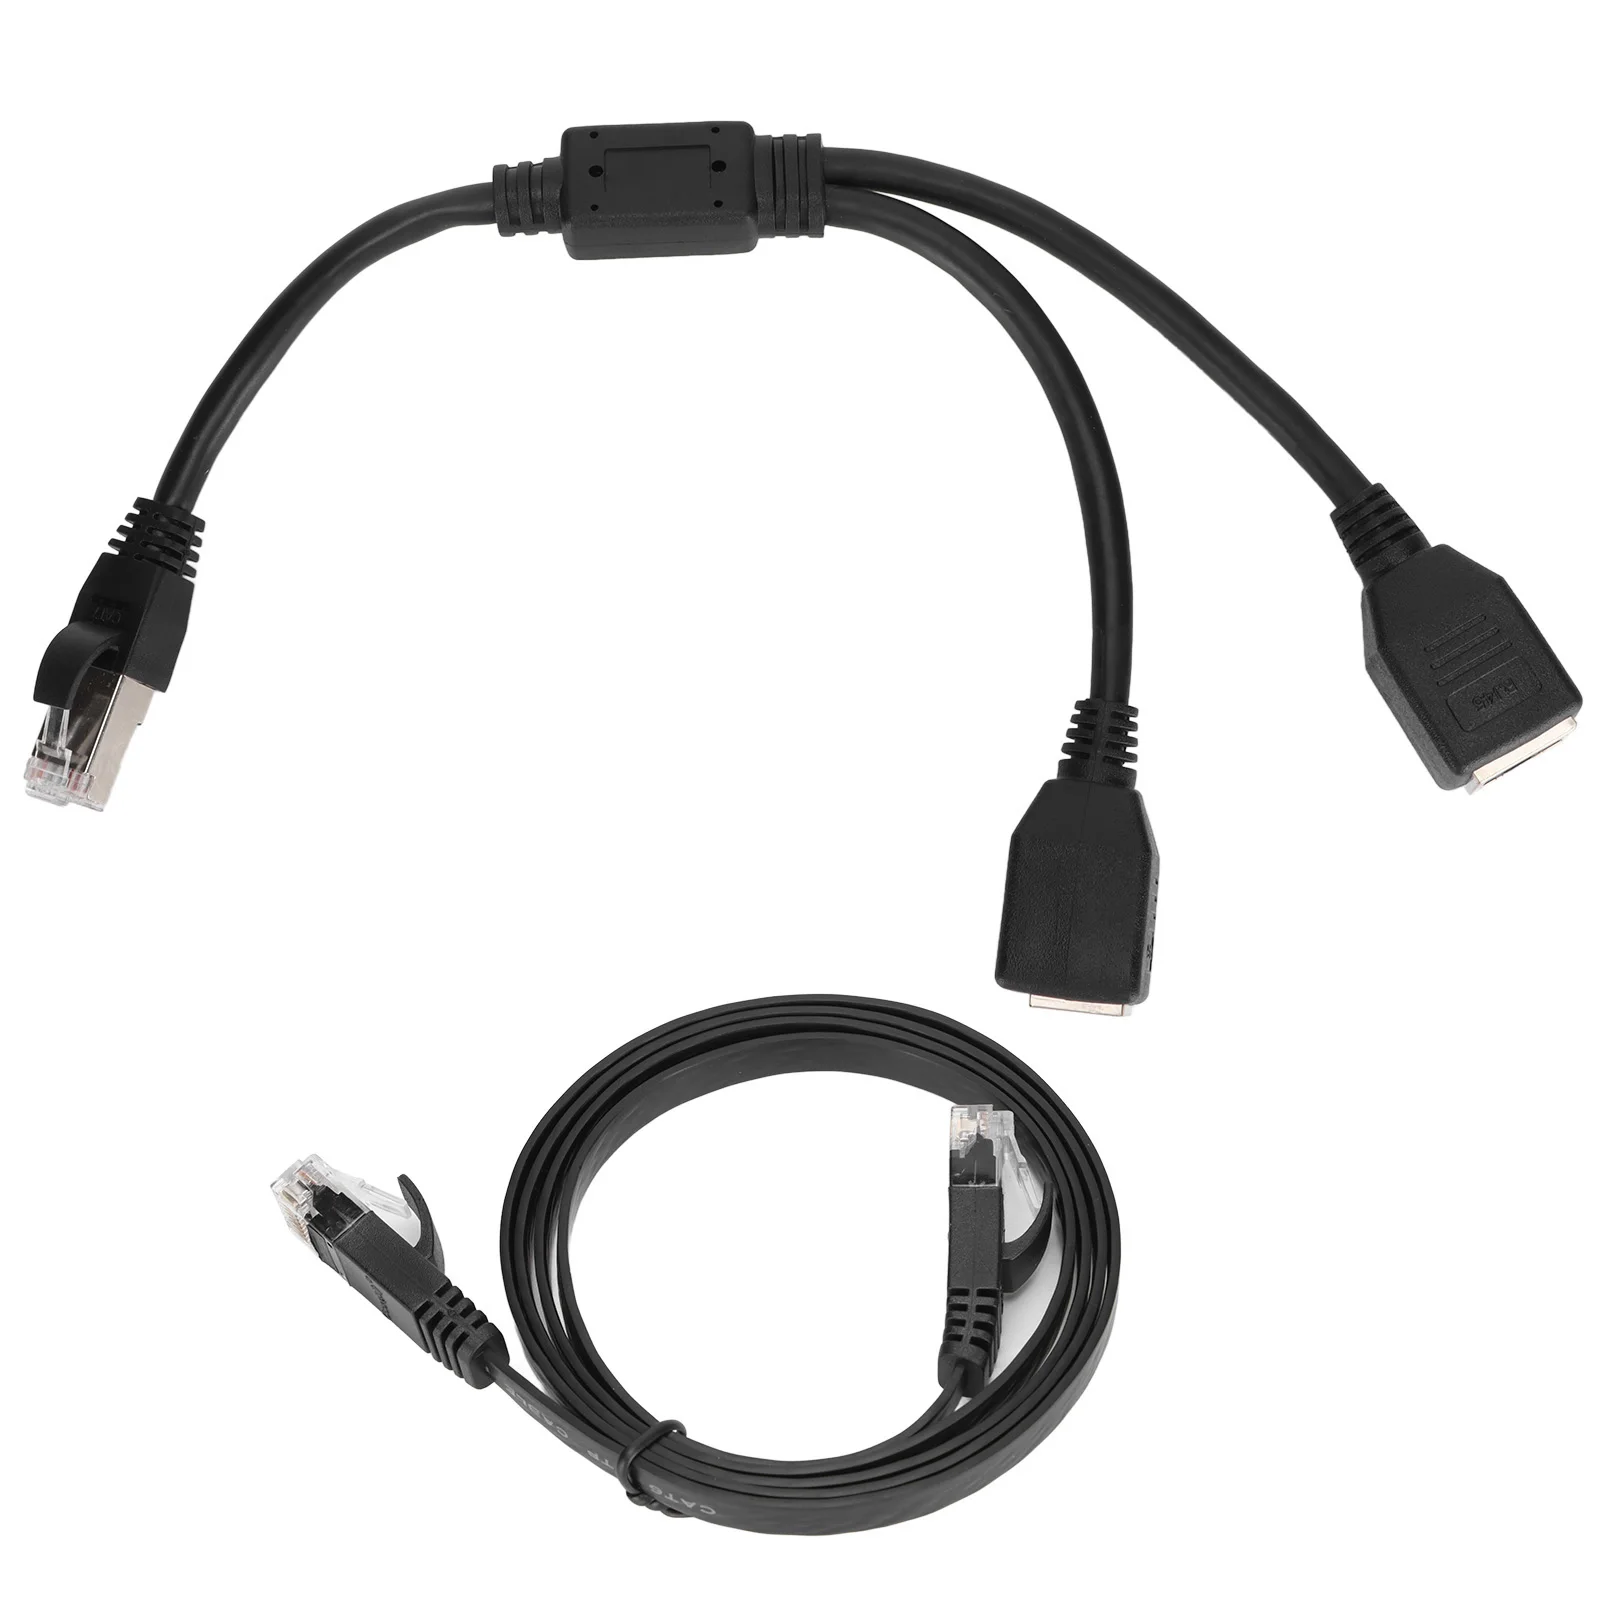 

RJ45 Ethernet Adapter Cable Extension Function 1 to 2 Port Excellent Connection Splitter Adapter for Home Office